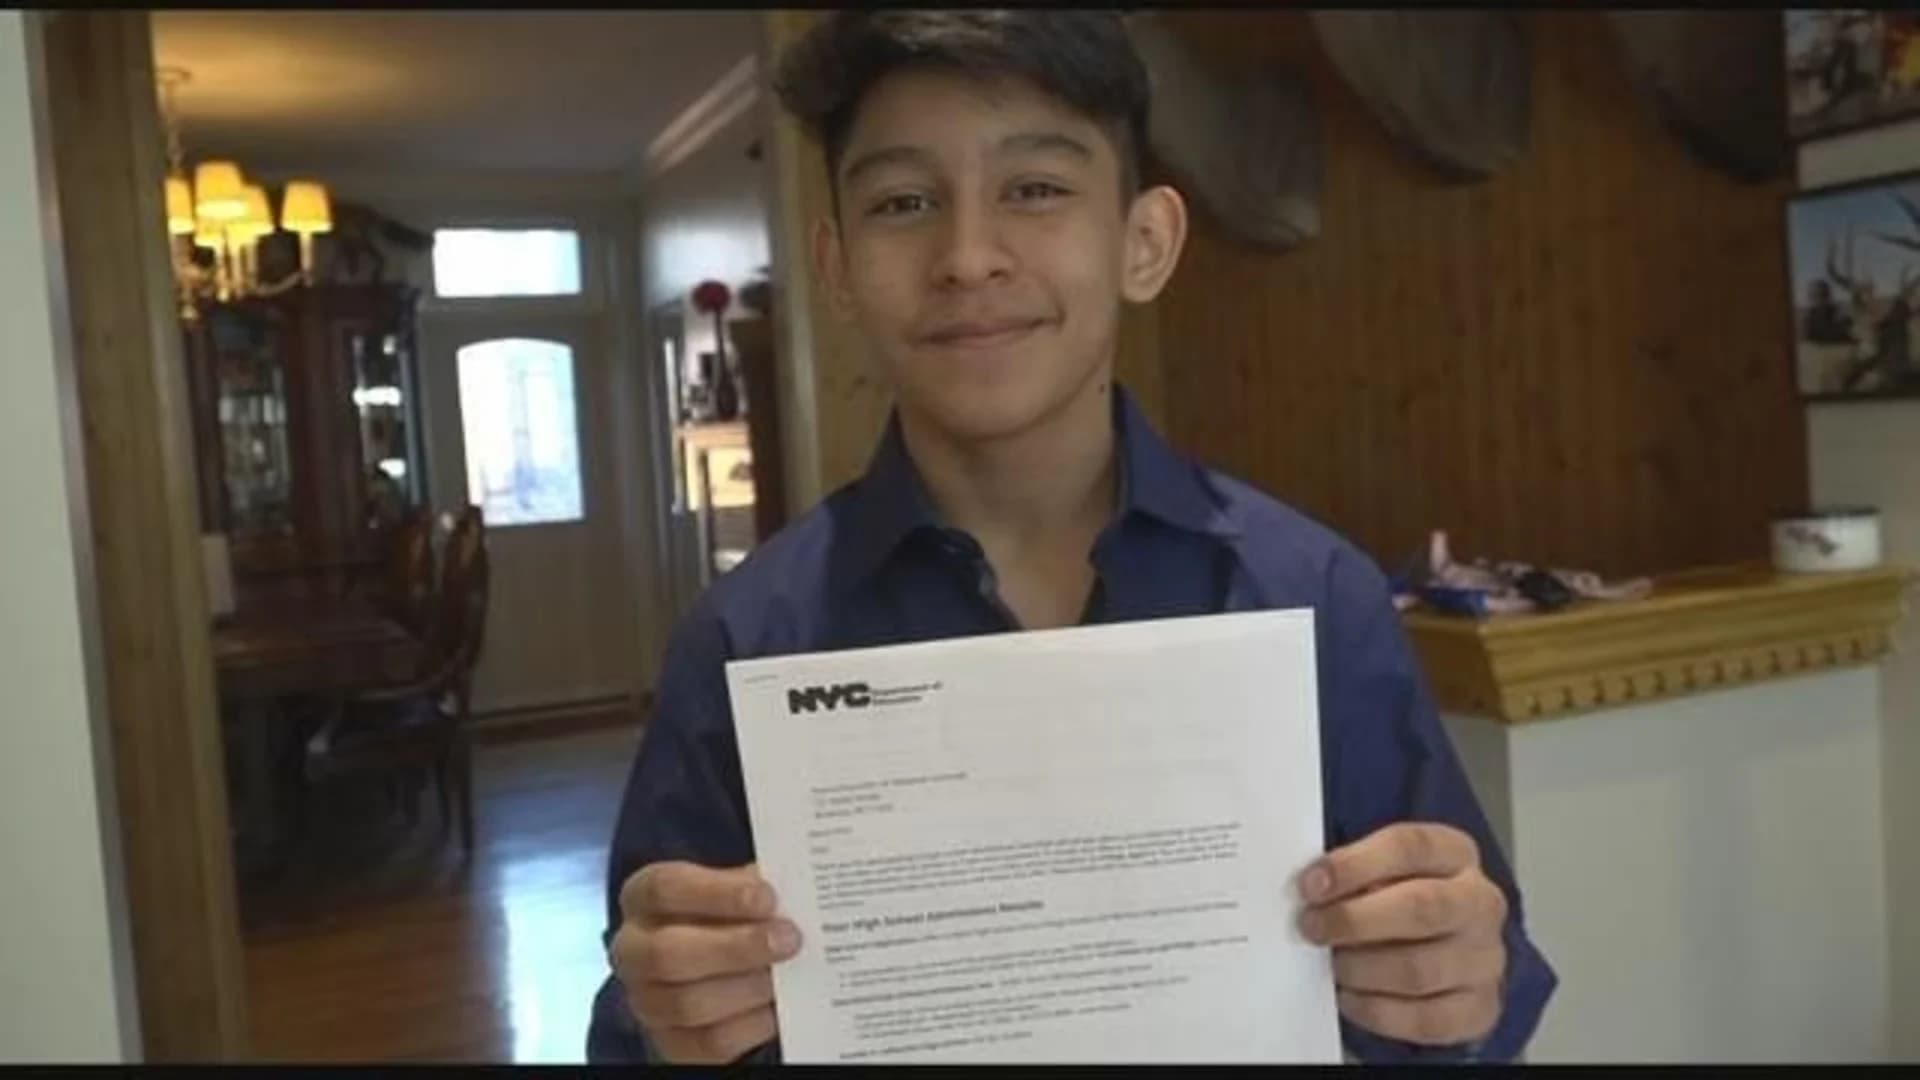 ‘I literally just yelled’: 13-year-old celebrates admission to top high school